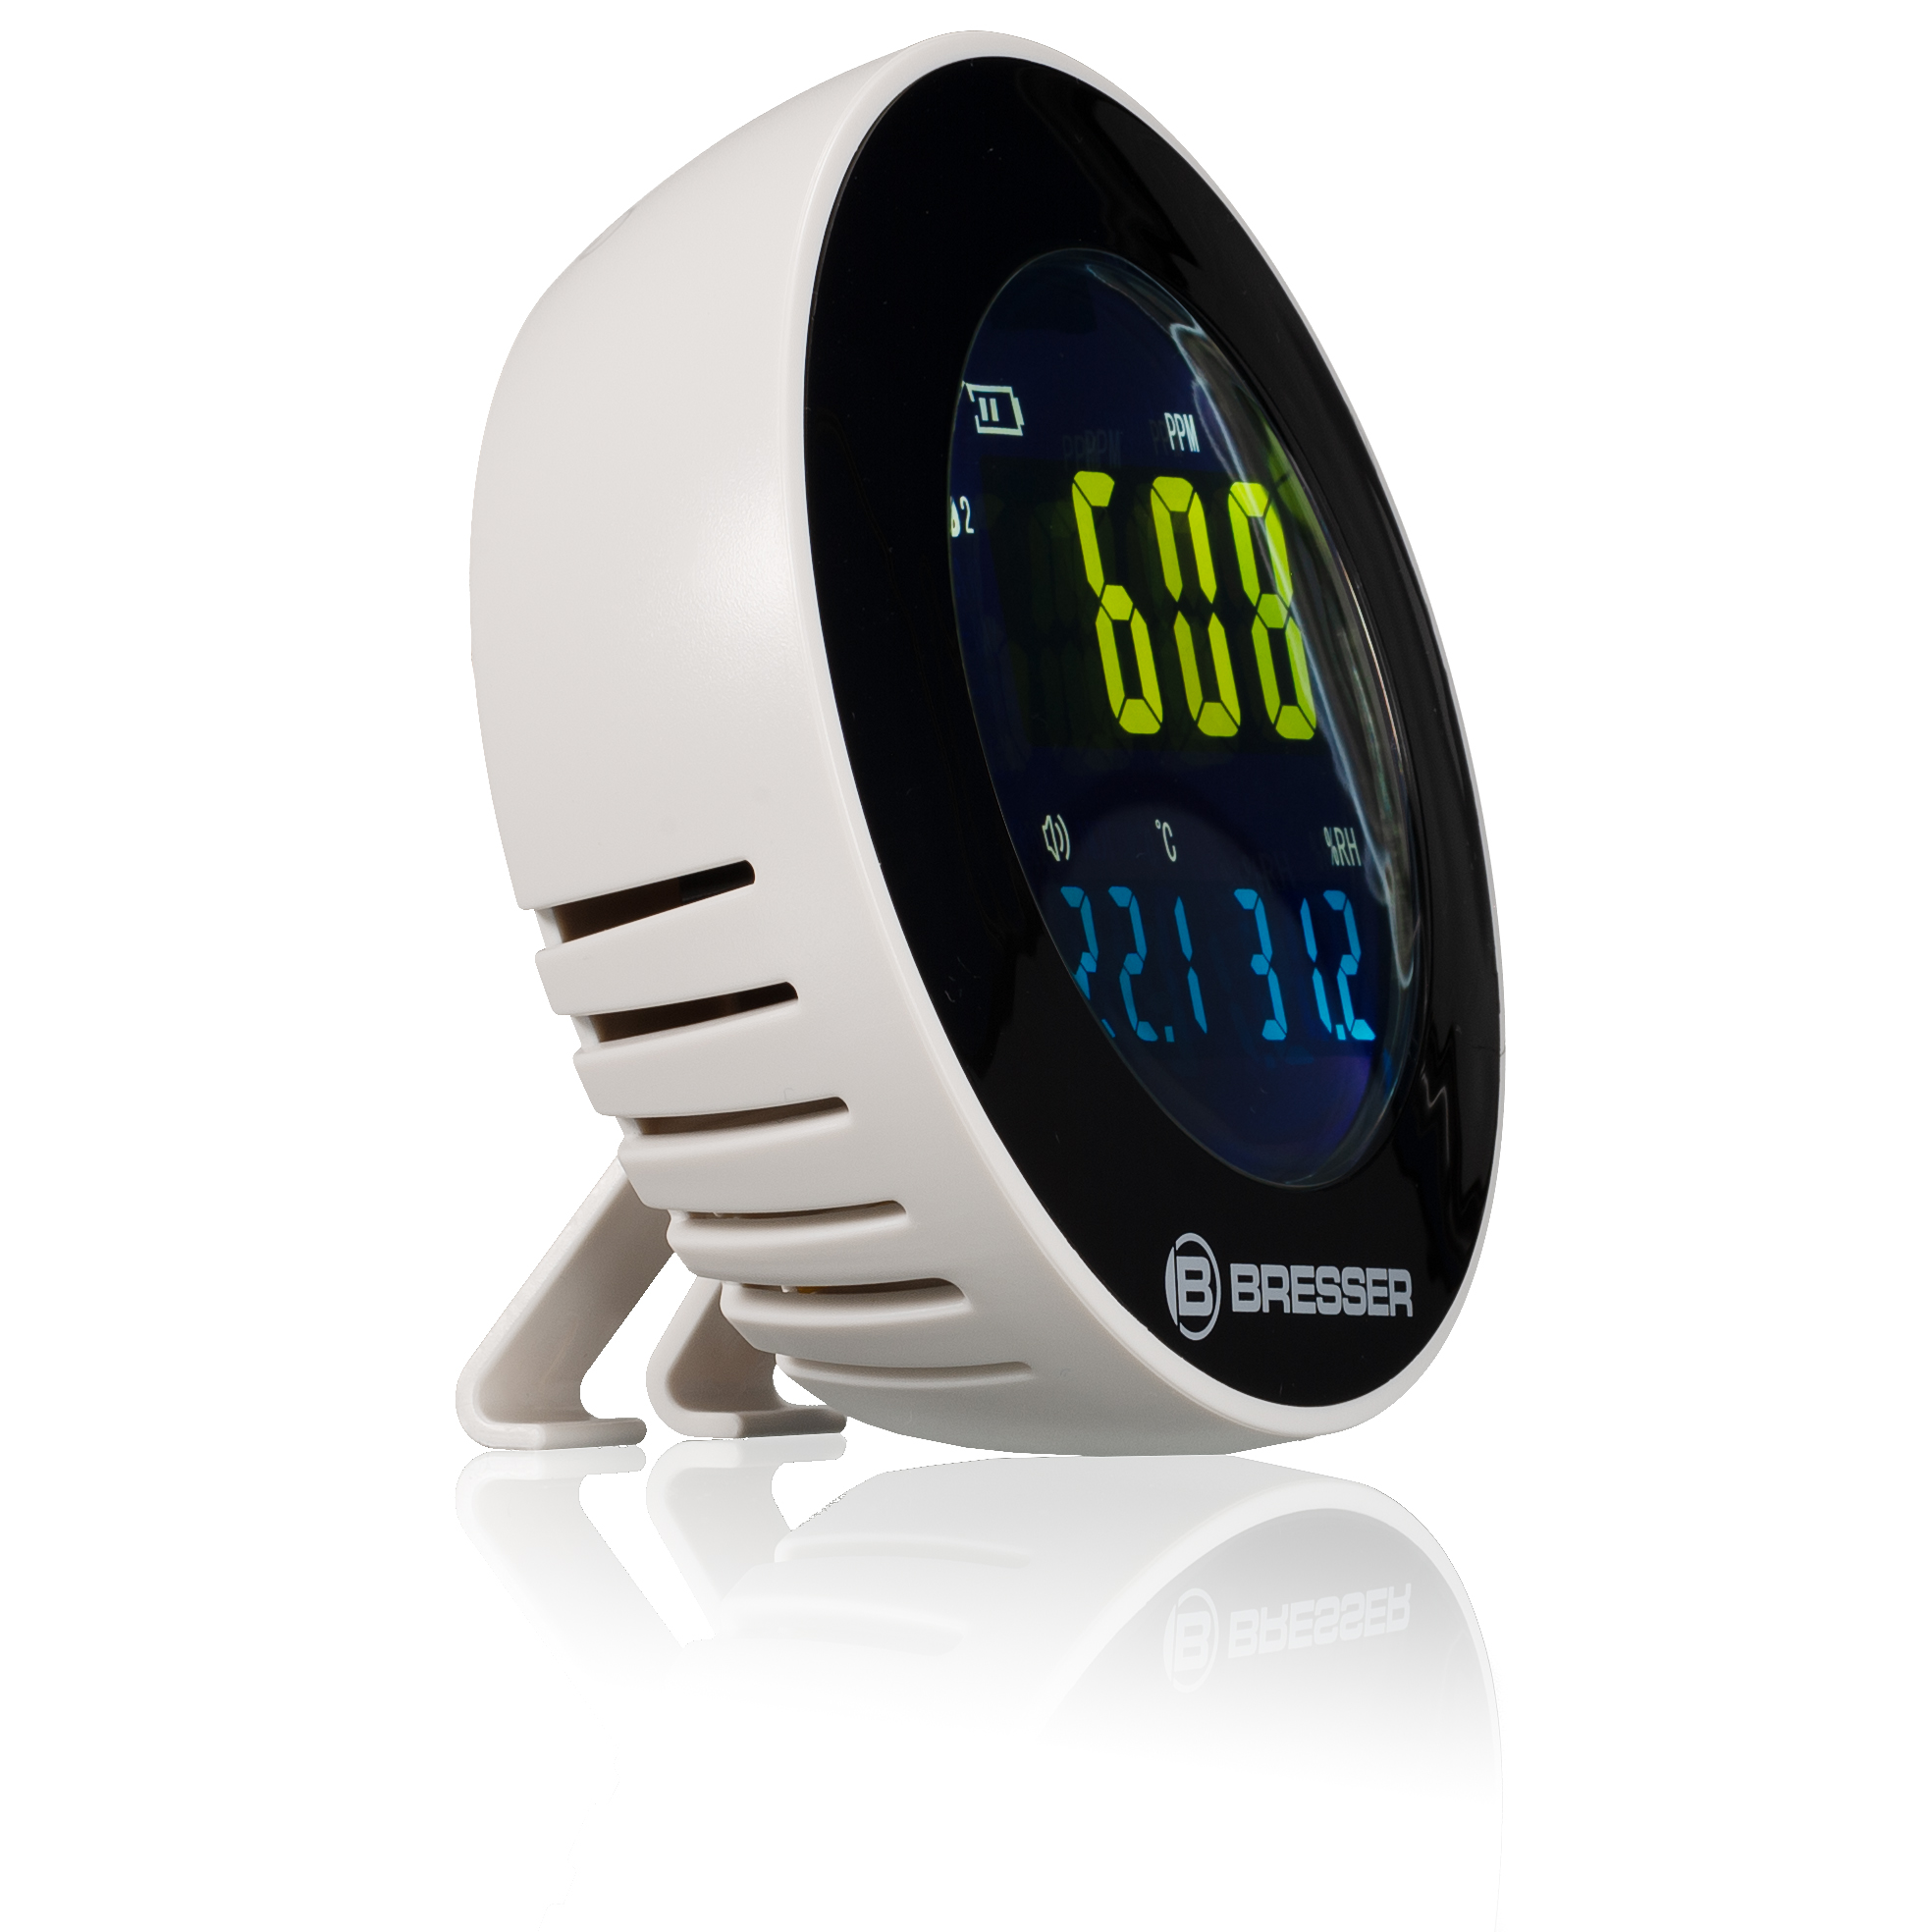 BRESSER CO2 monitor with data logger for air quality control INV